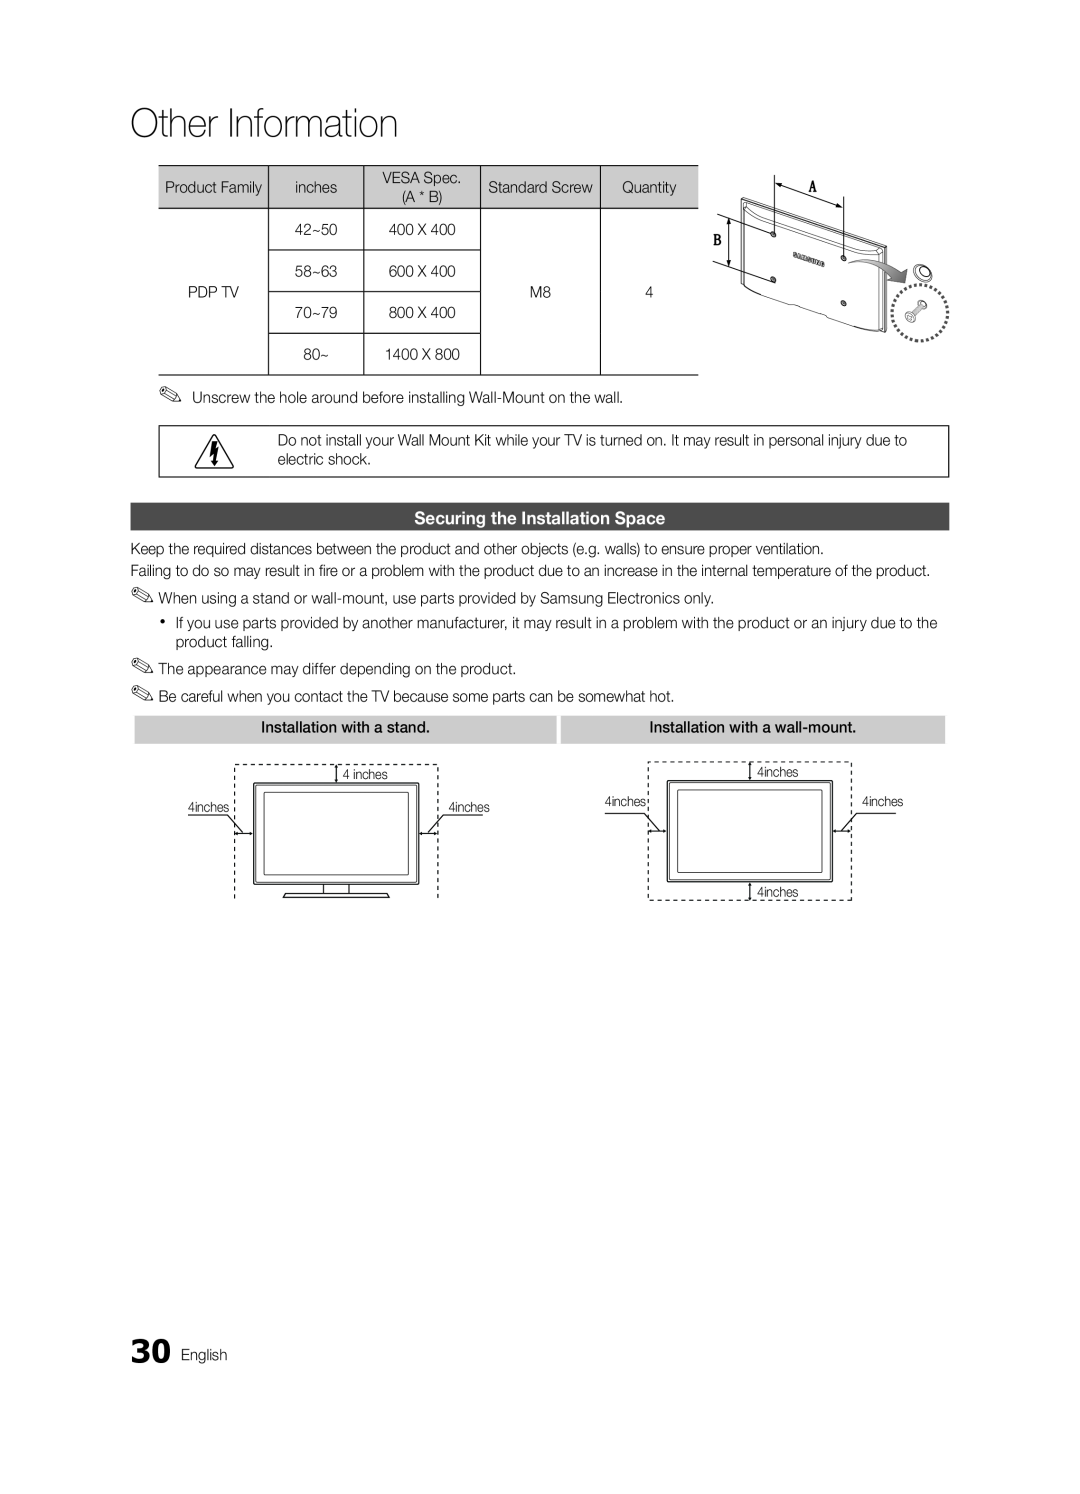 Samsung BN68-02576B-06, PC430-ZC user manual Securing the Installation Space, Other Information 